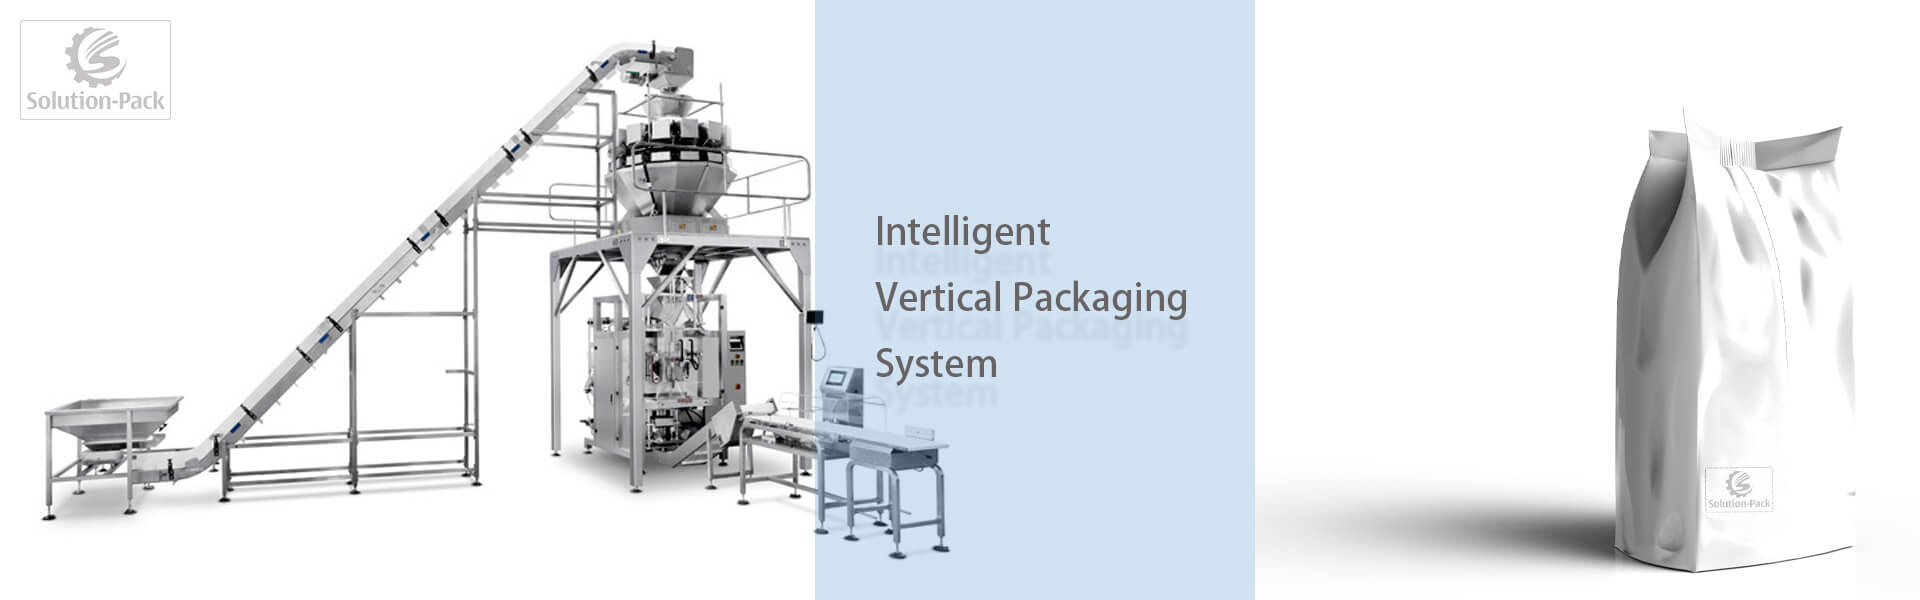 Solution-Pack | Vertical Packaging System | Integrated Packing Production Line | Heading Banner Picture